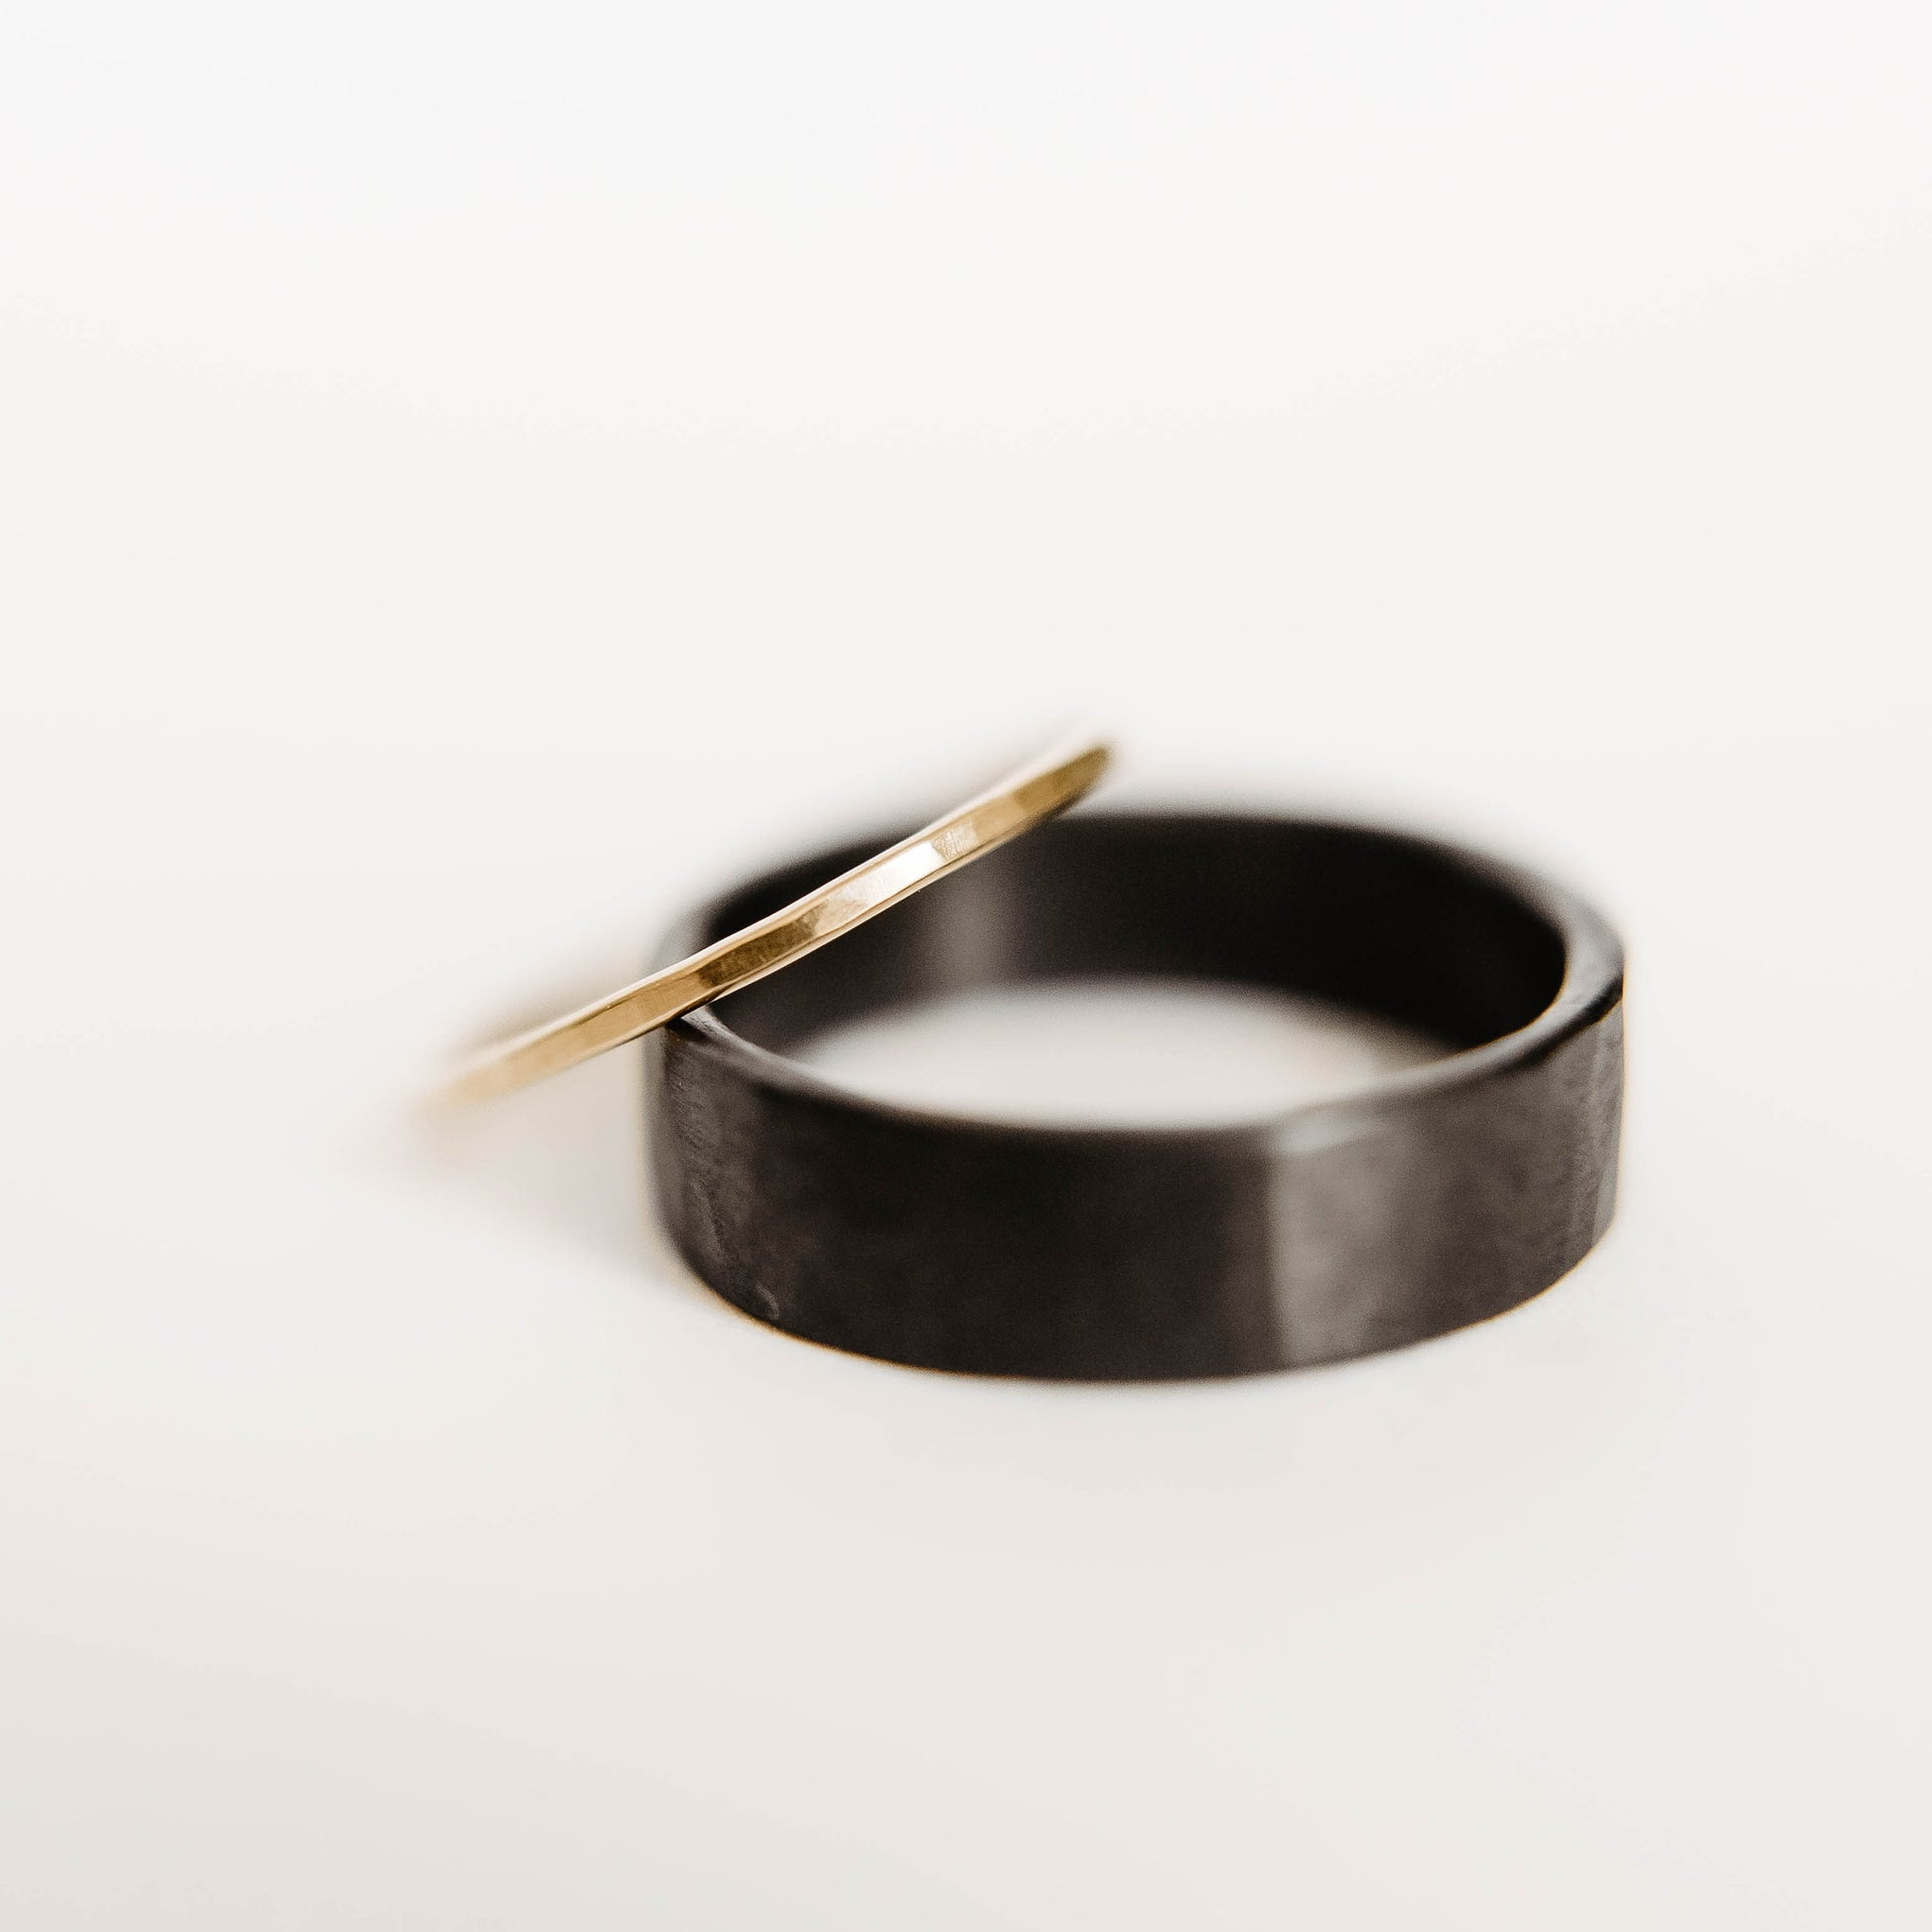 Womens Hammered Gold Wedding Band. This photo shows a dainty hammered 14k gold ring. (Shown on black ring with white background)